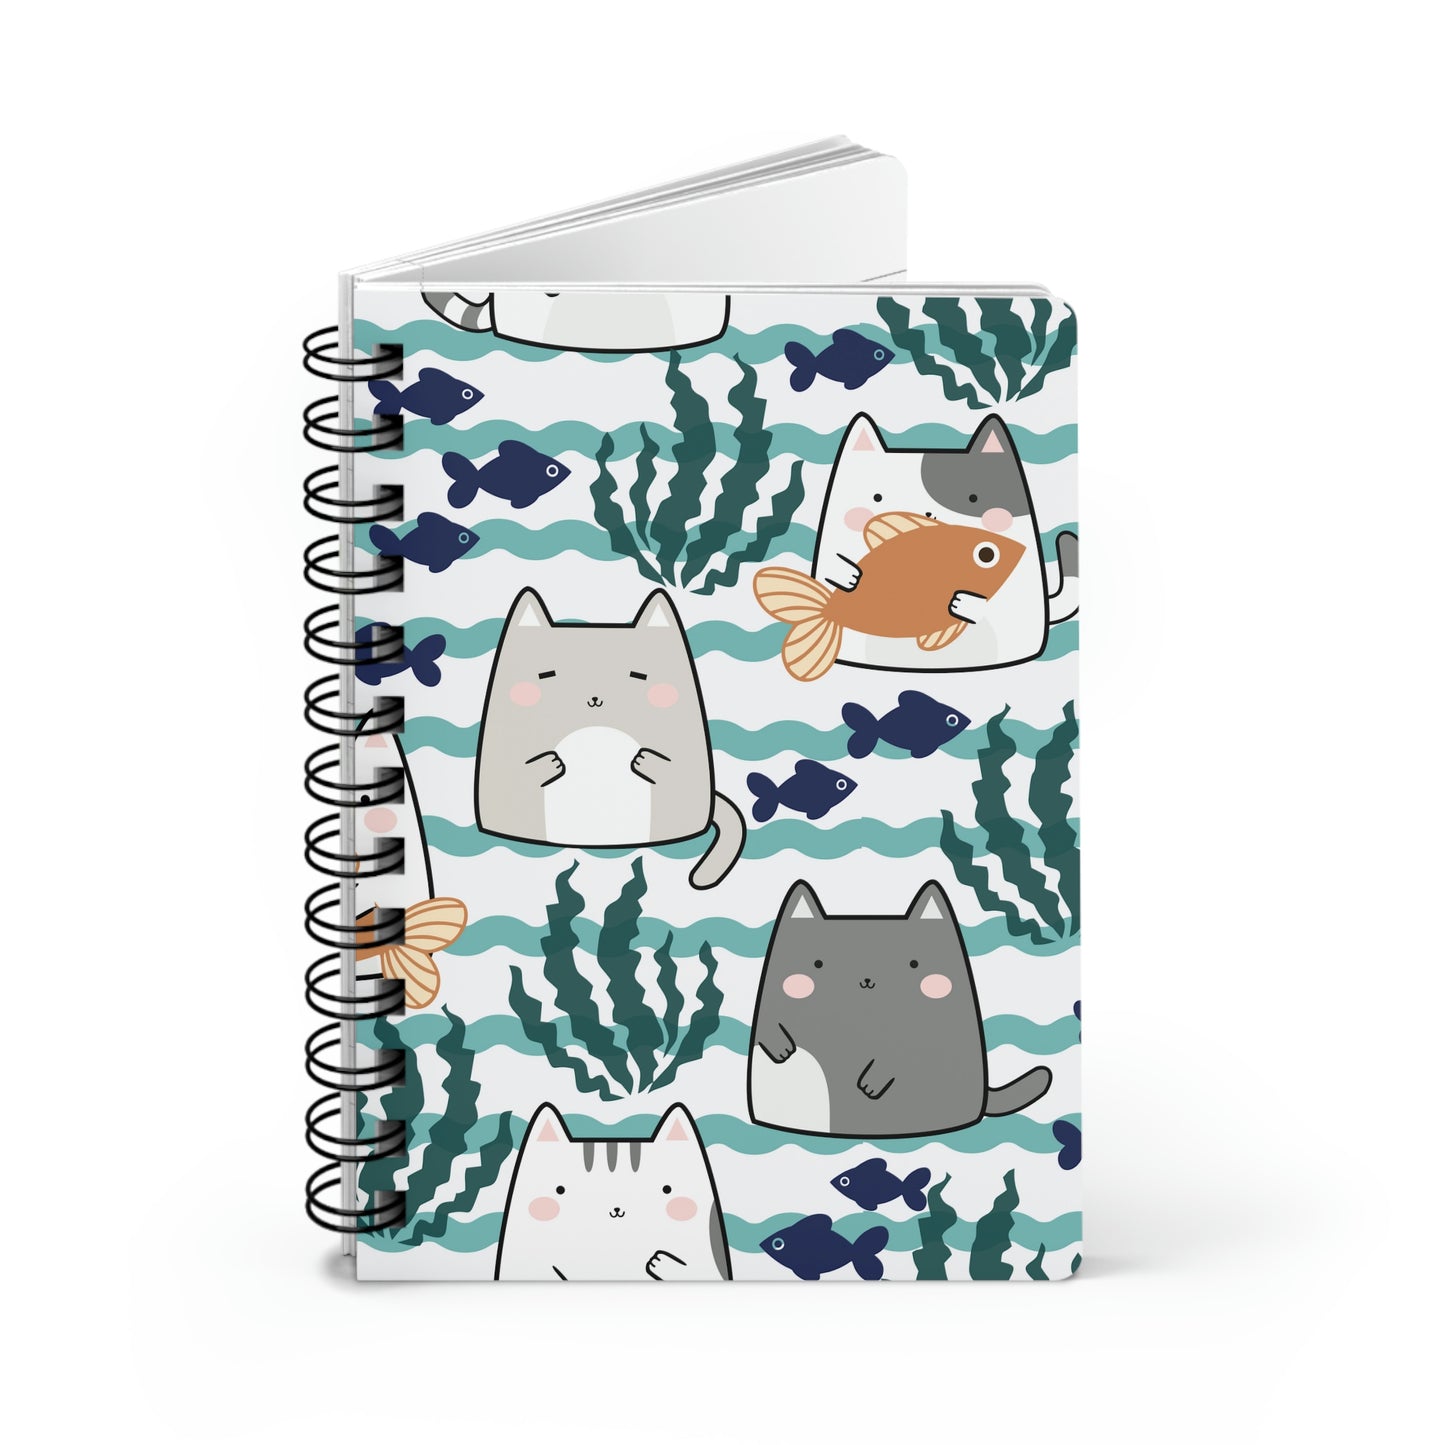 Kawaii Cats and Fishes Spiral Bound Journal